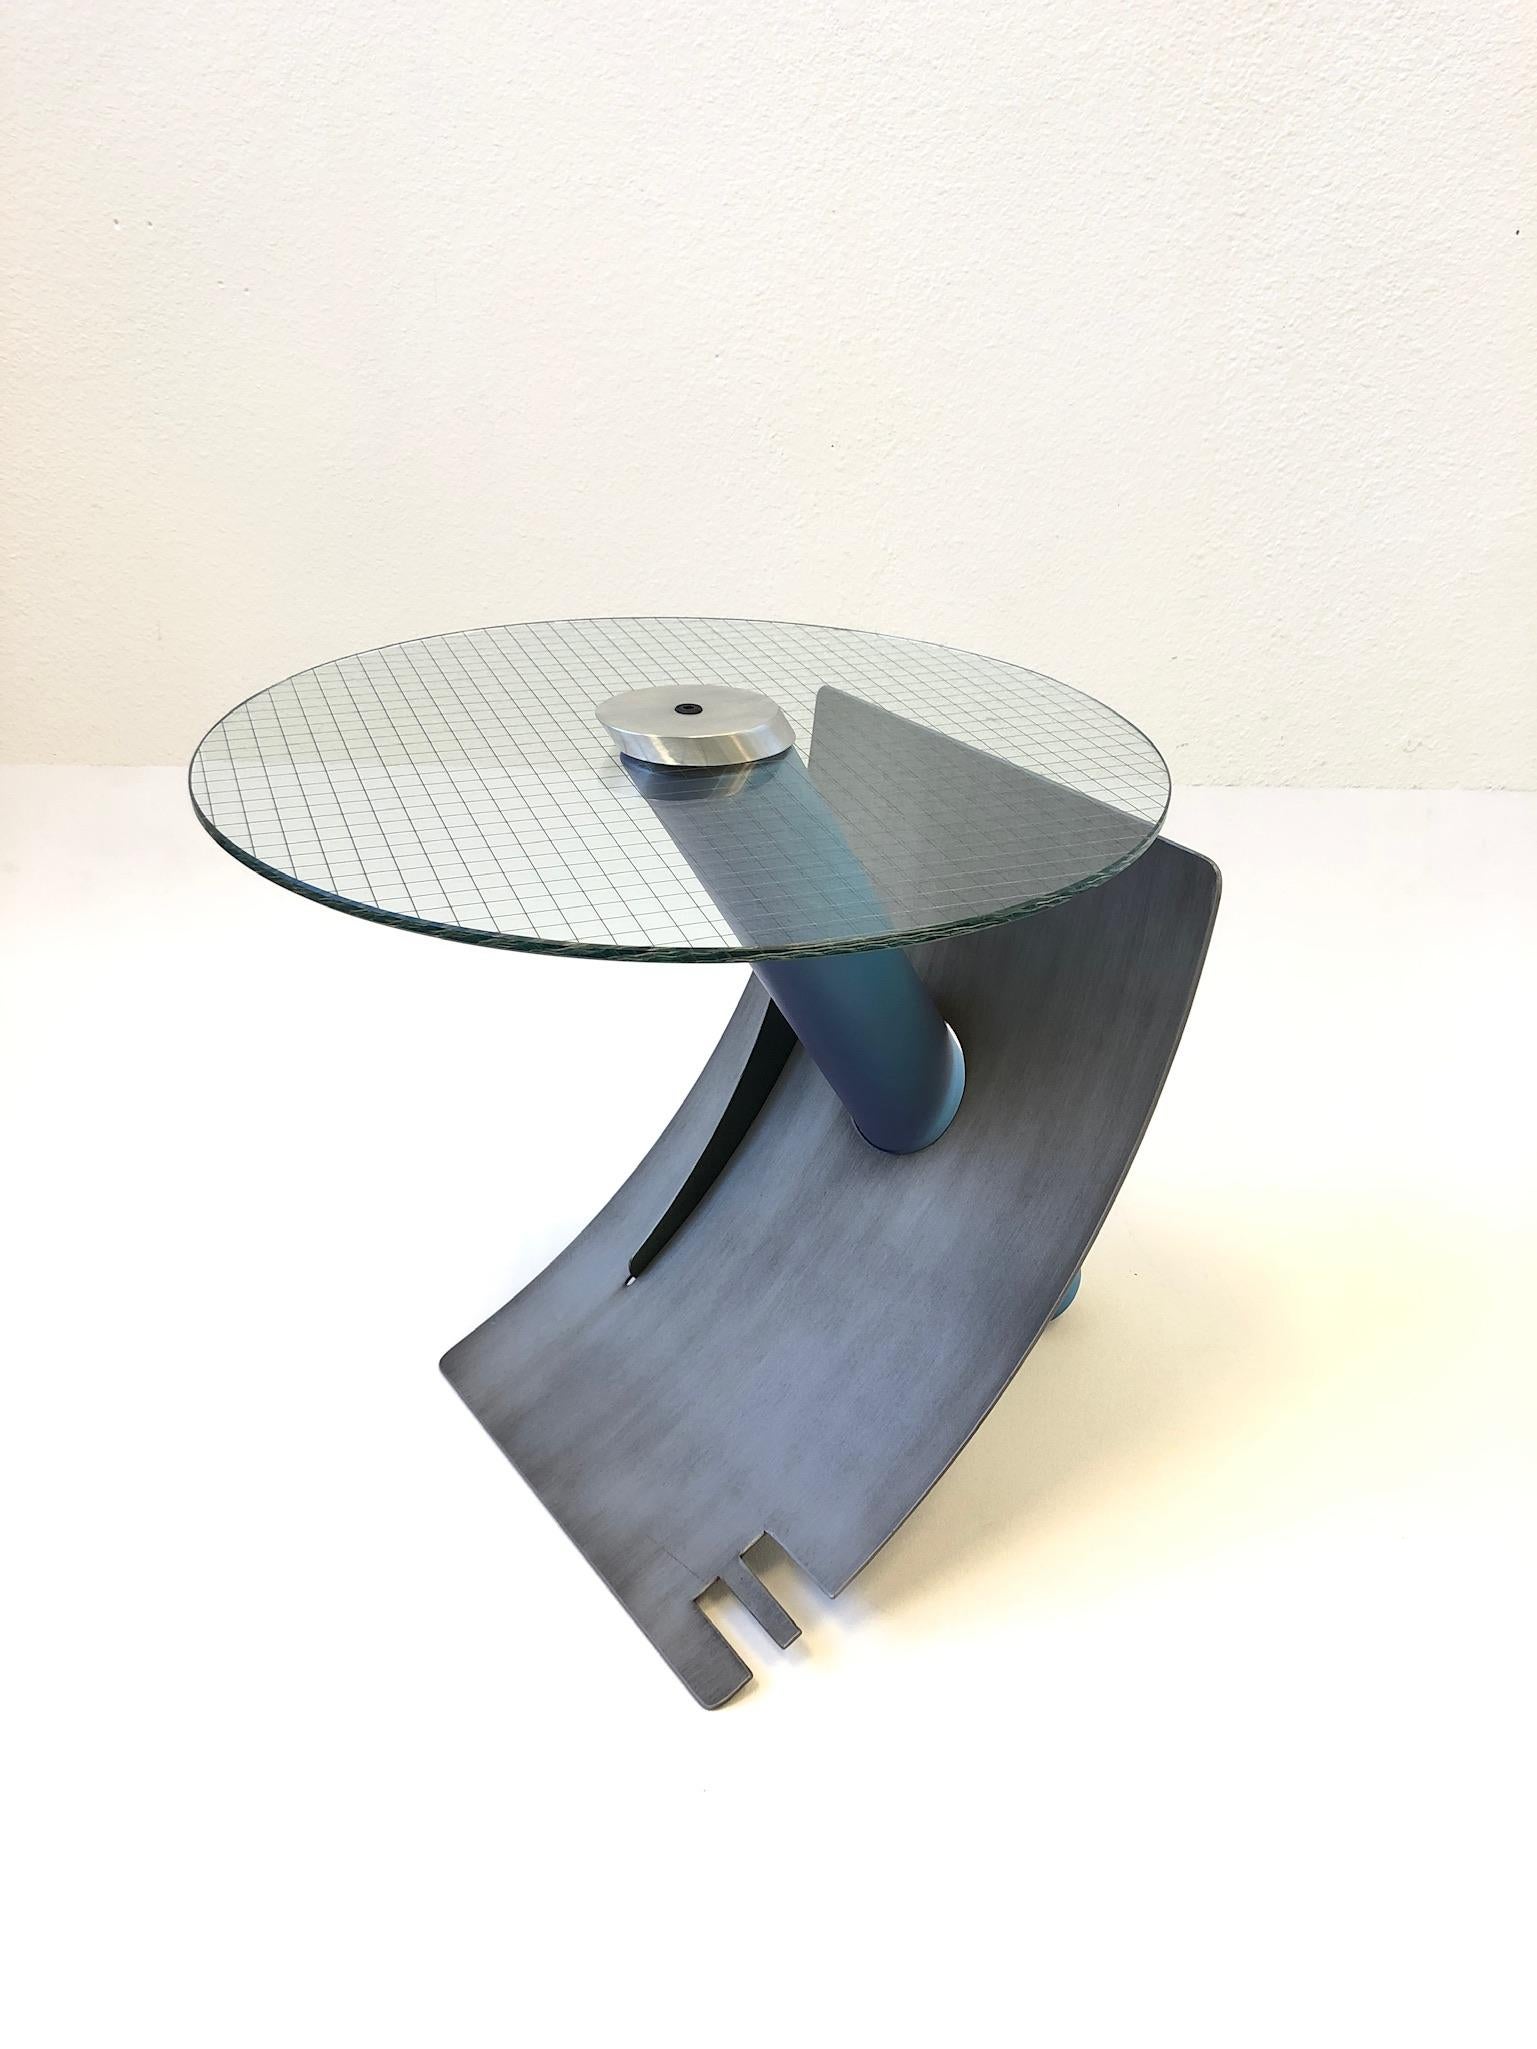 A spectacular studio Postmodern side table by Sculptor Michael Graham. The table is constructed of steel that’s lacquered. The top cap is aluminum that hold the steel grid glass top to the base. The table is signed M. Graham and dated 1994 (see